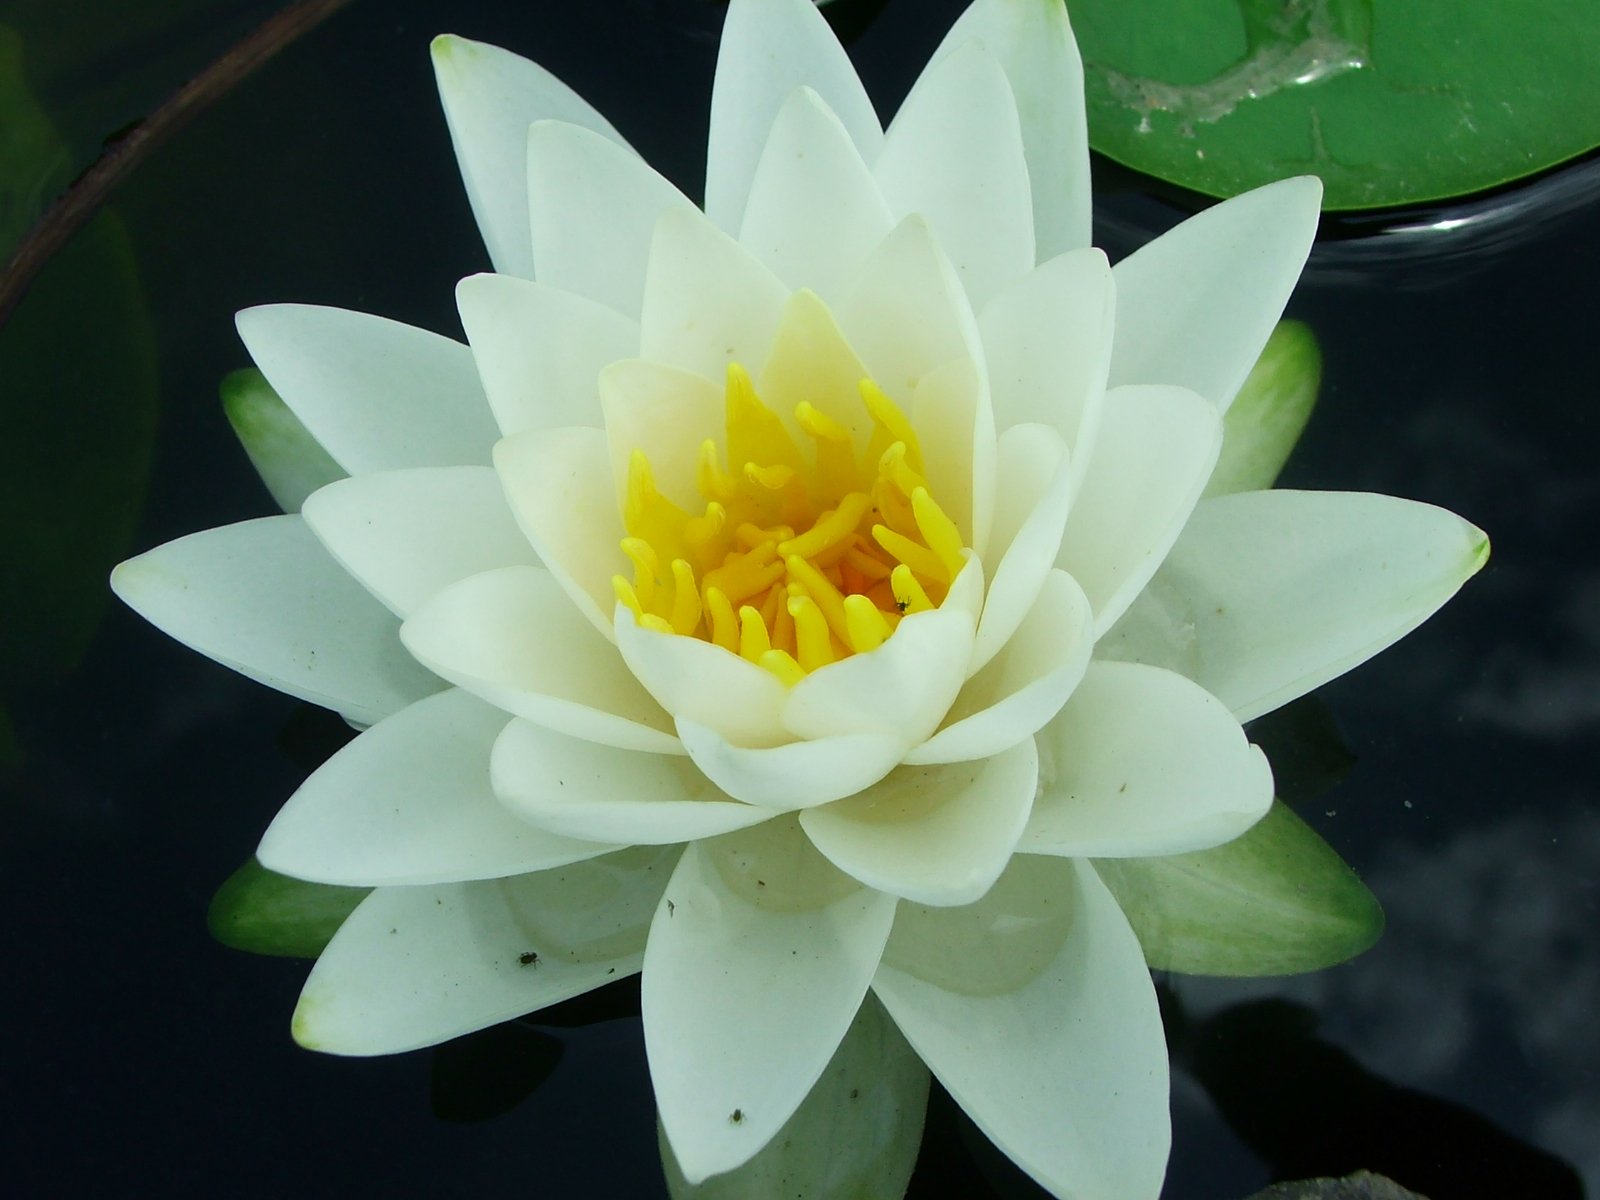 the center of the lily is white with yellow centre